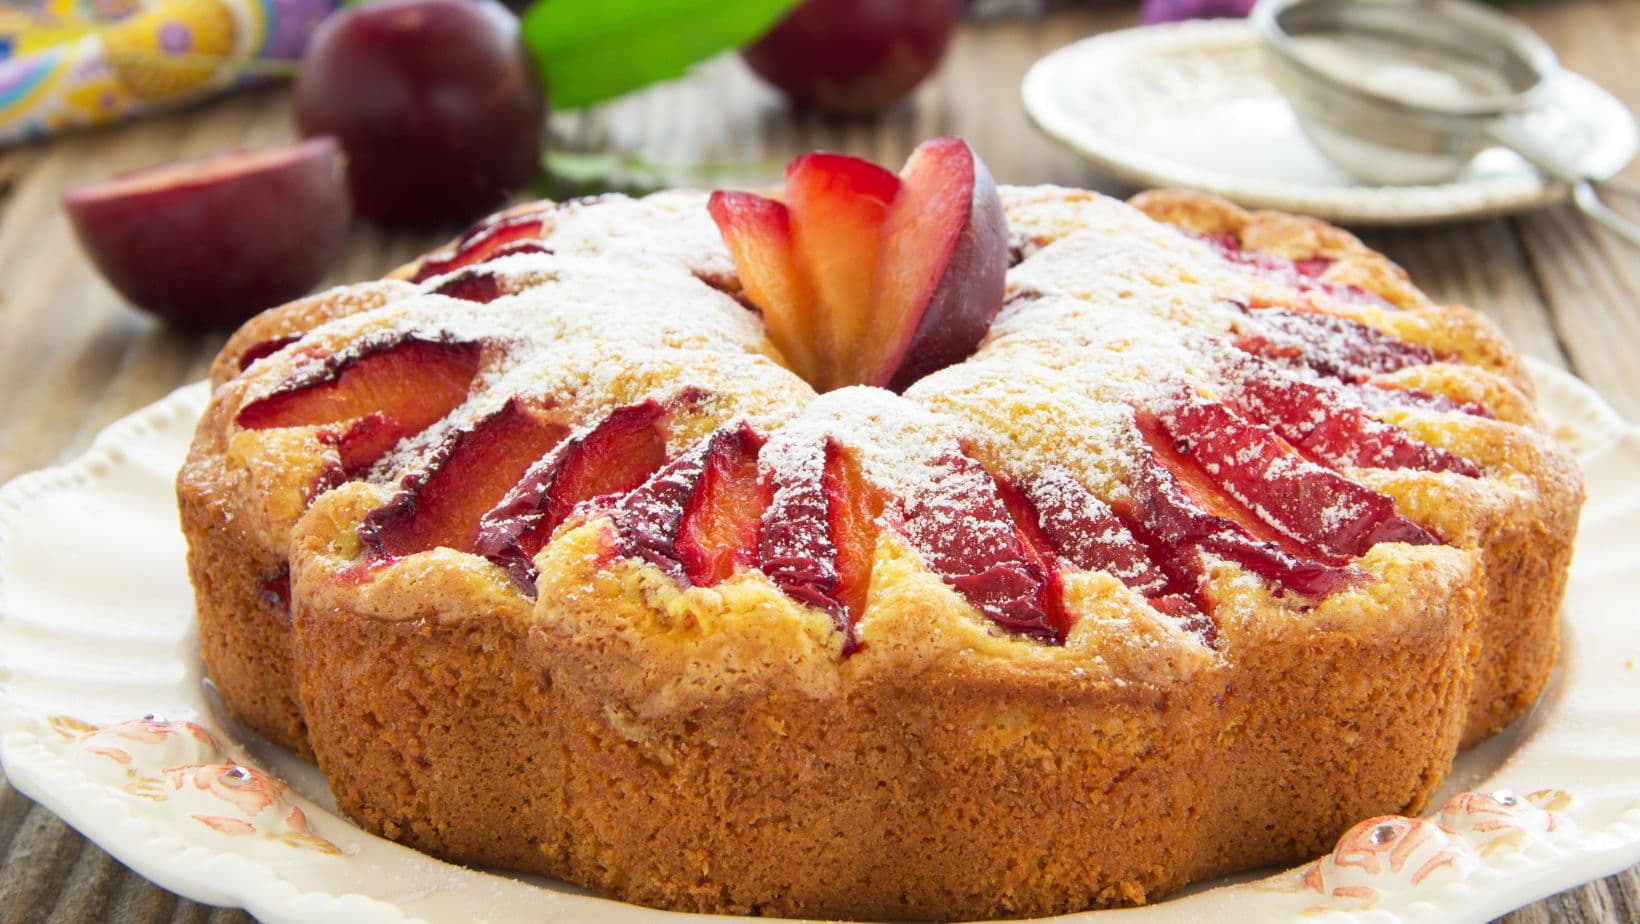 Plum cake with plums in the background